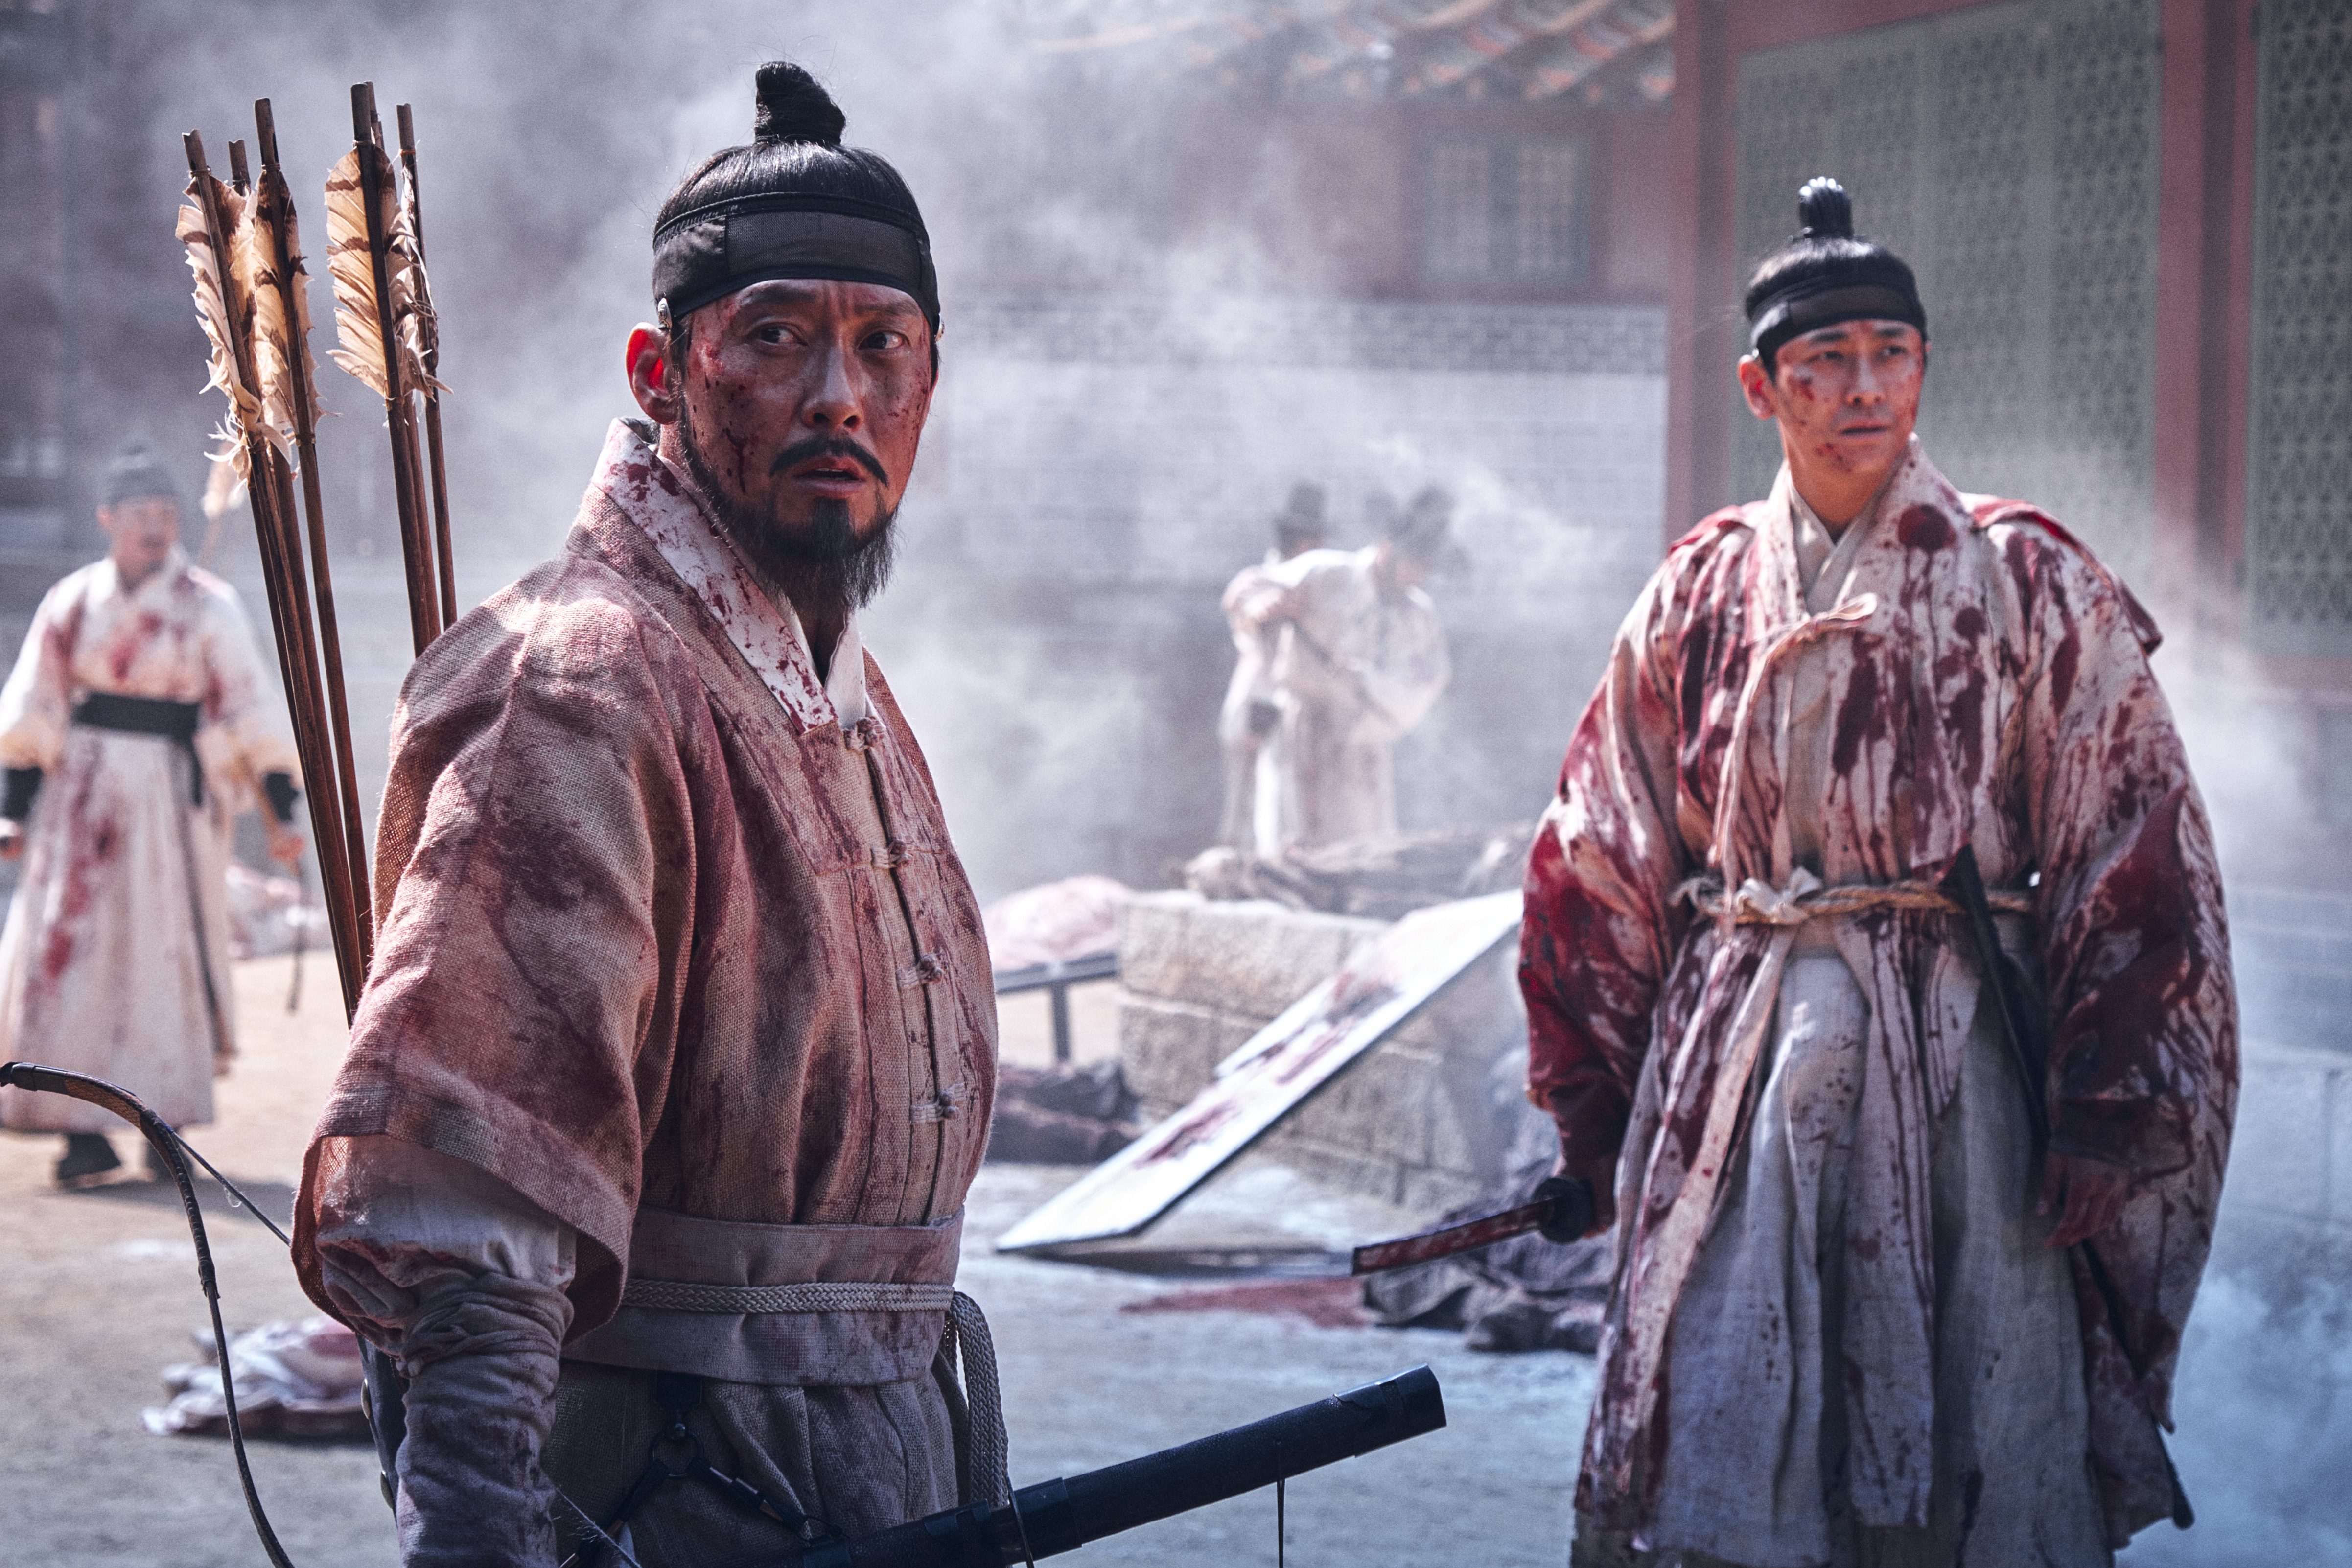 Two Korean warriors standing and surveying post-battle covered in blood, in Kingdom